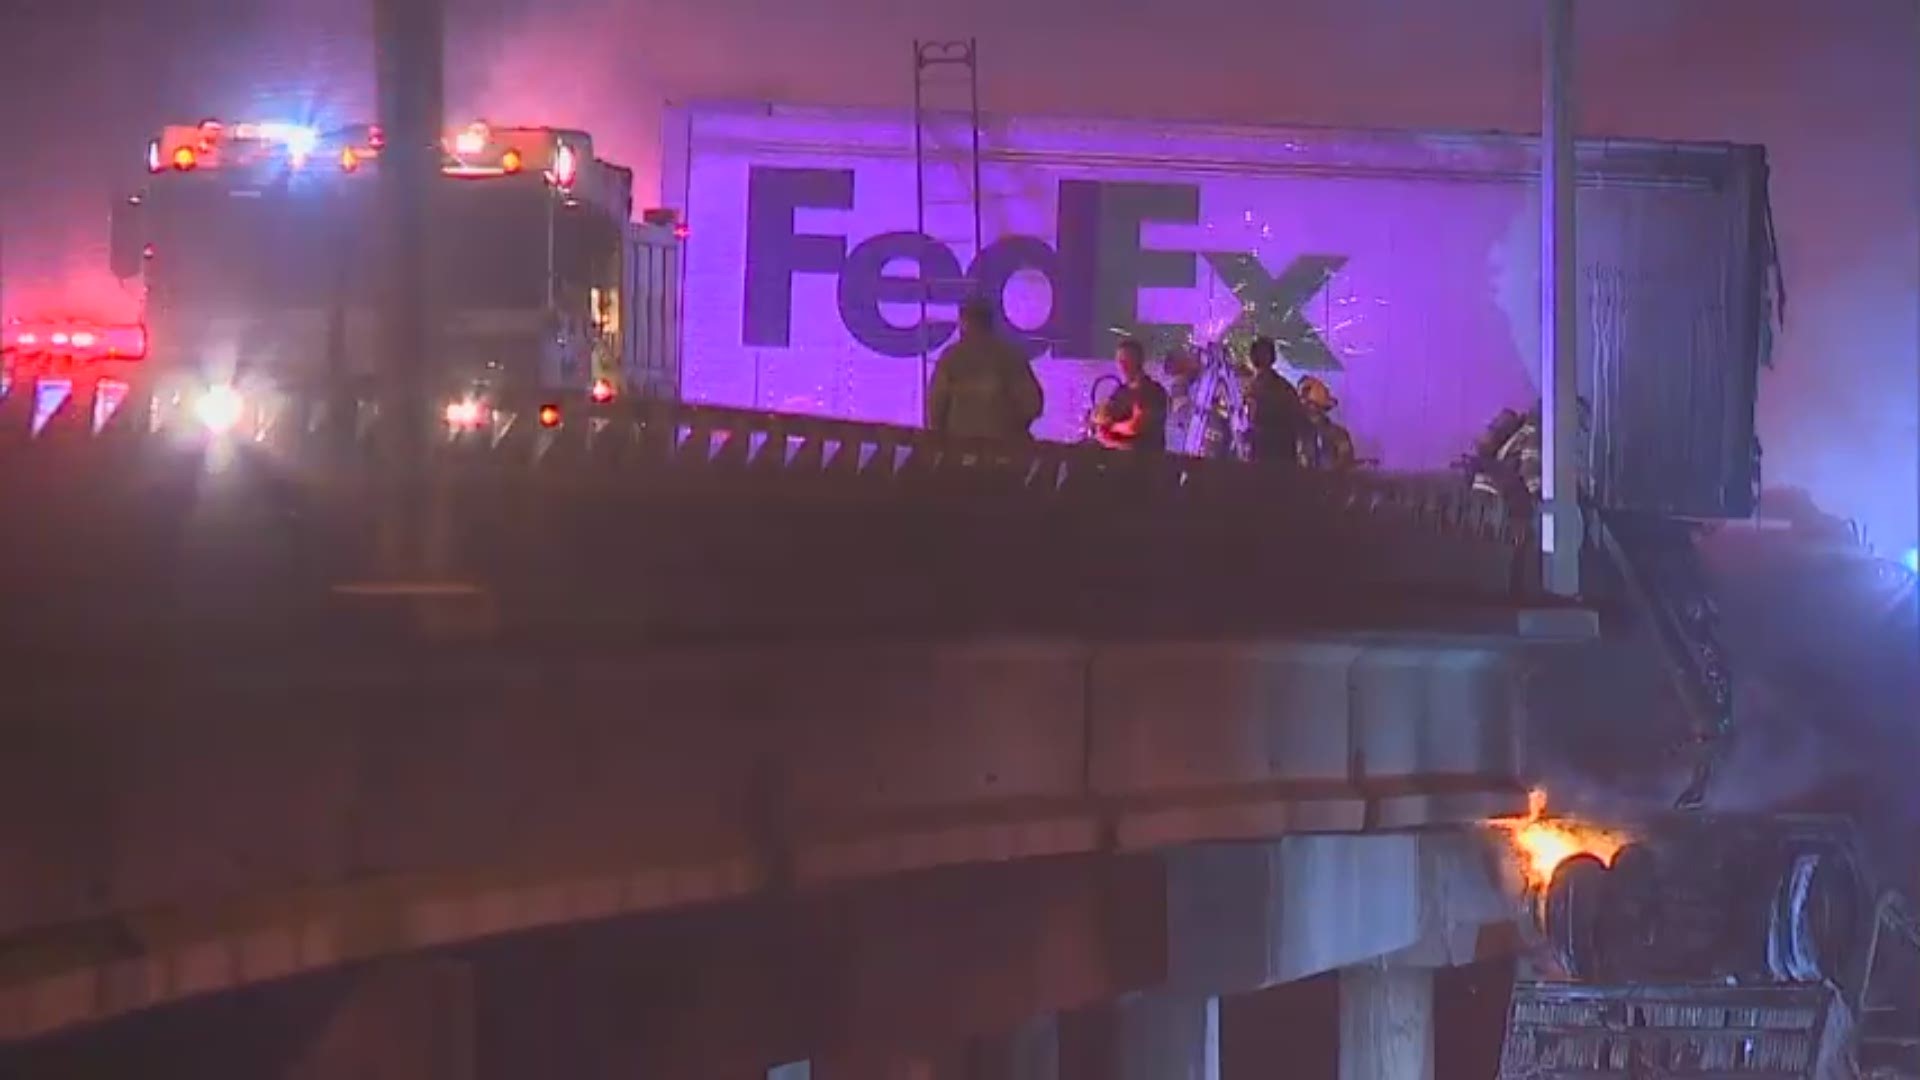 The driver's truck plunged off a bridge and caught fire, police said.